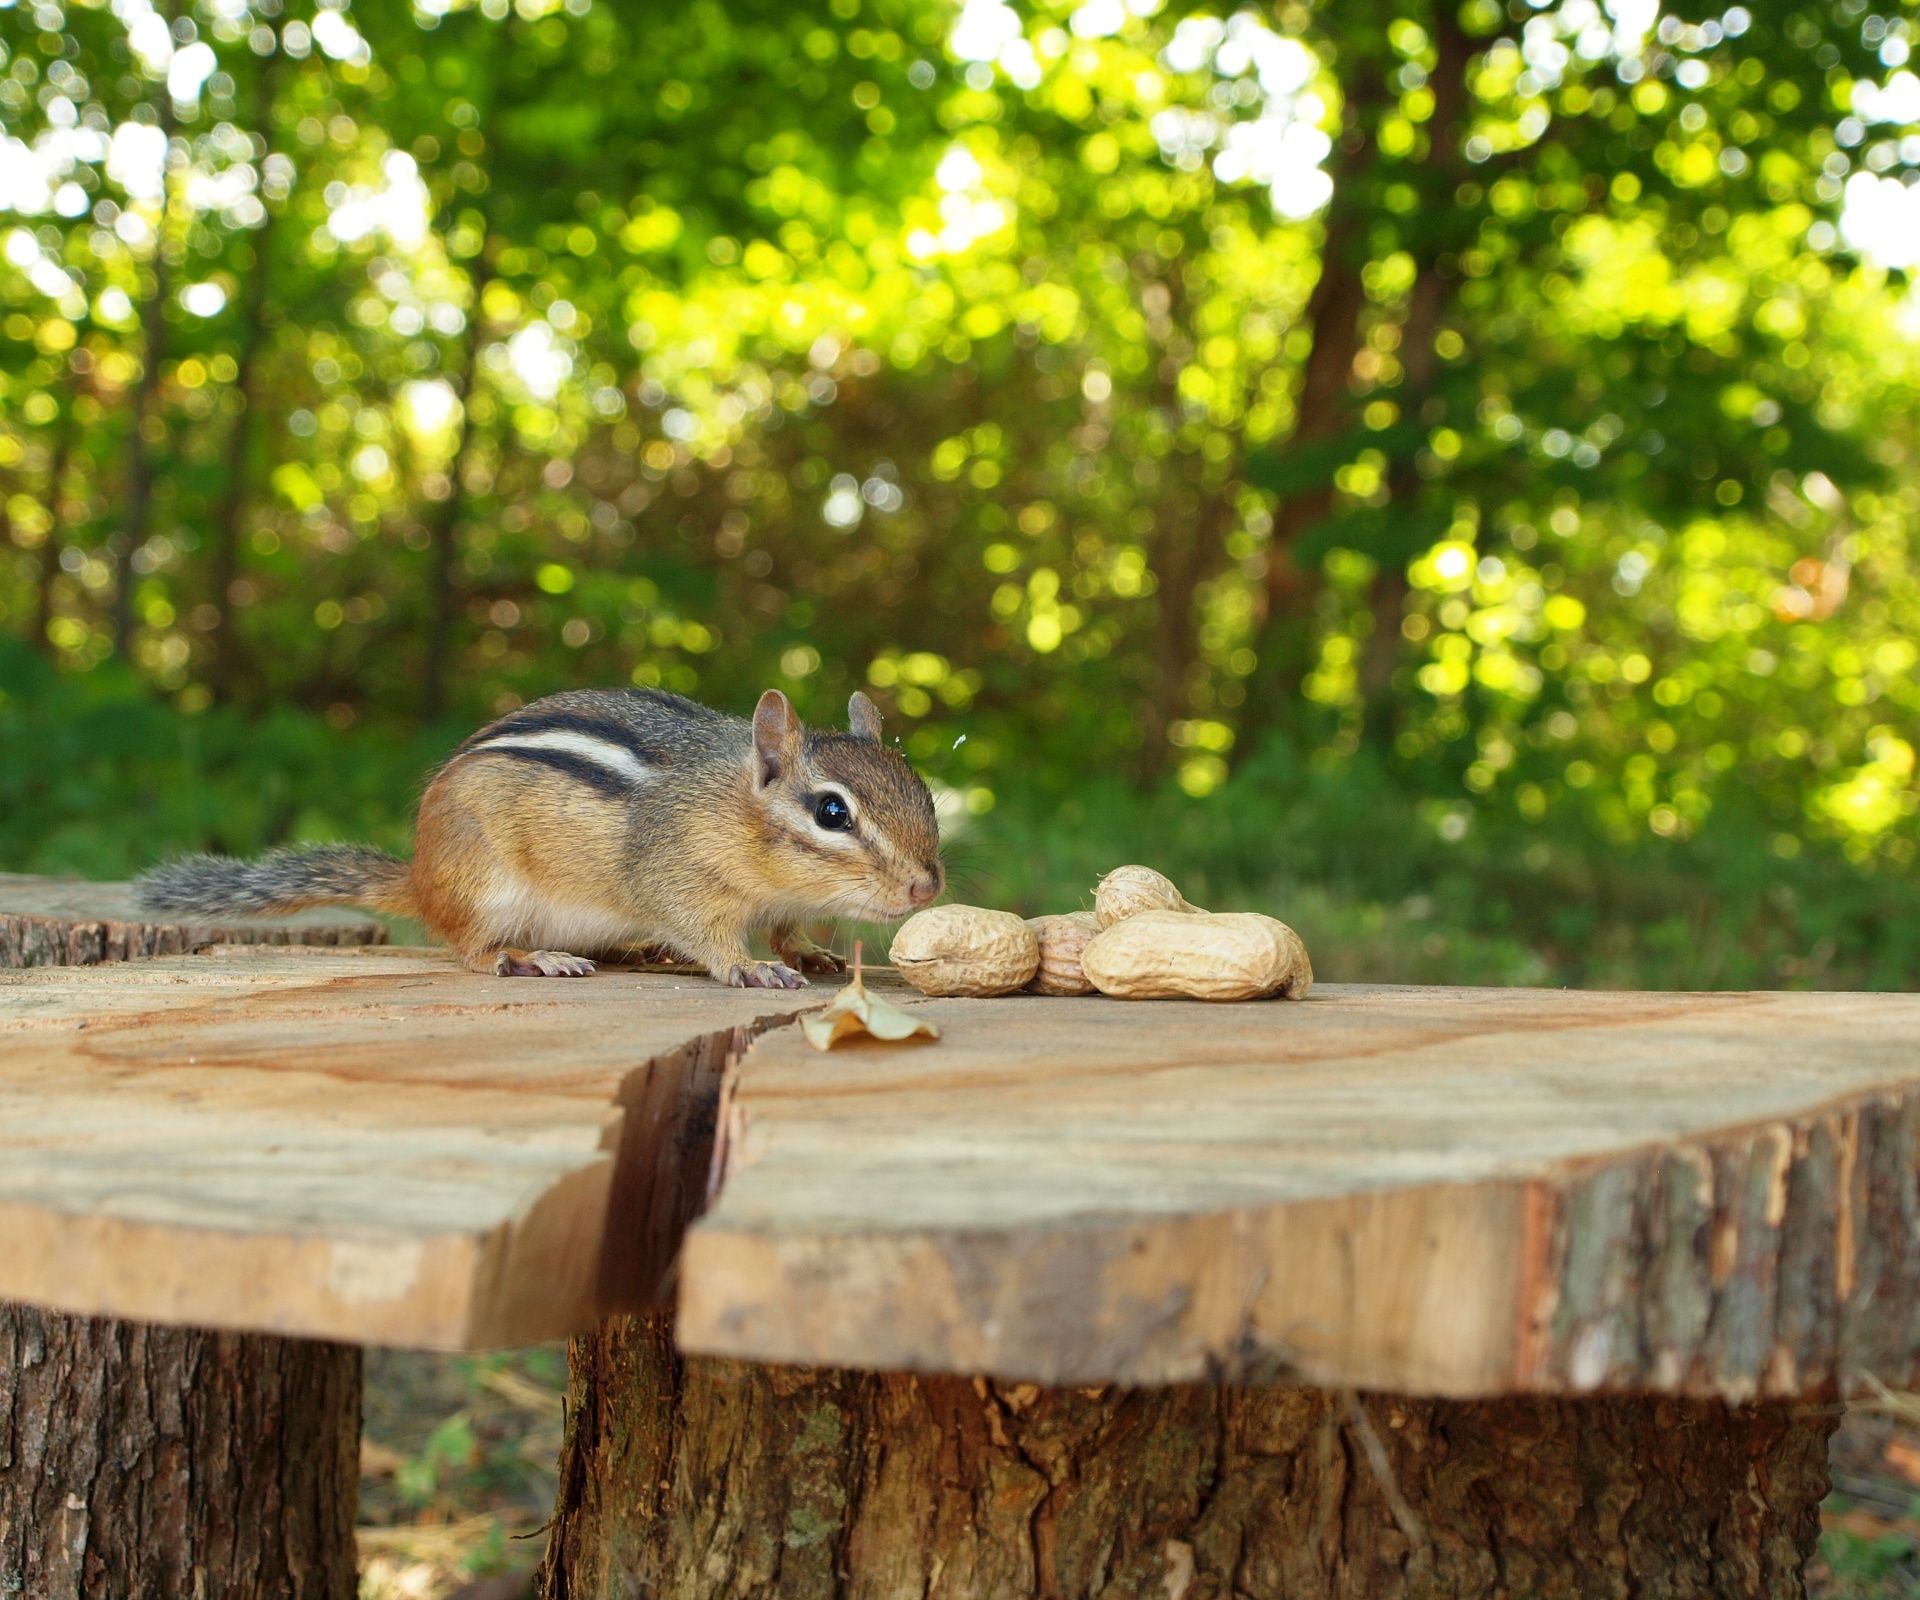 a chipmunk approaches a small pile of peanuts that provide the focal point for this image